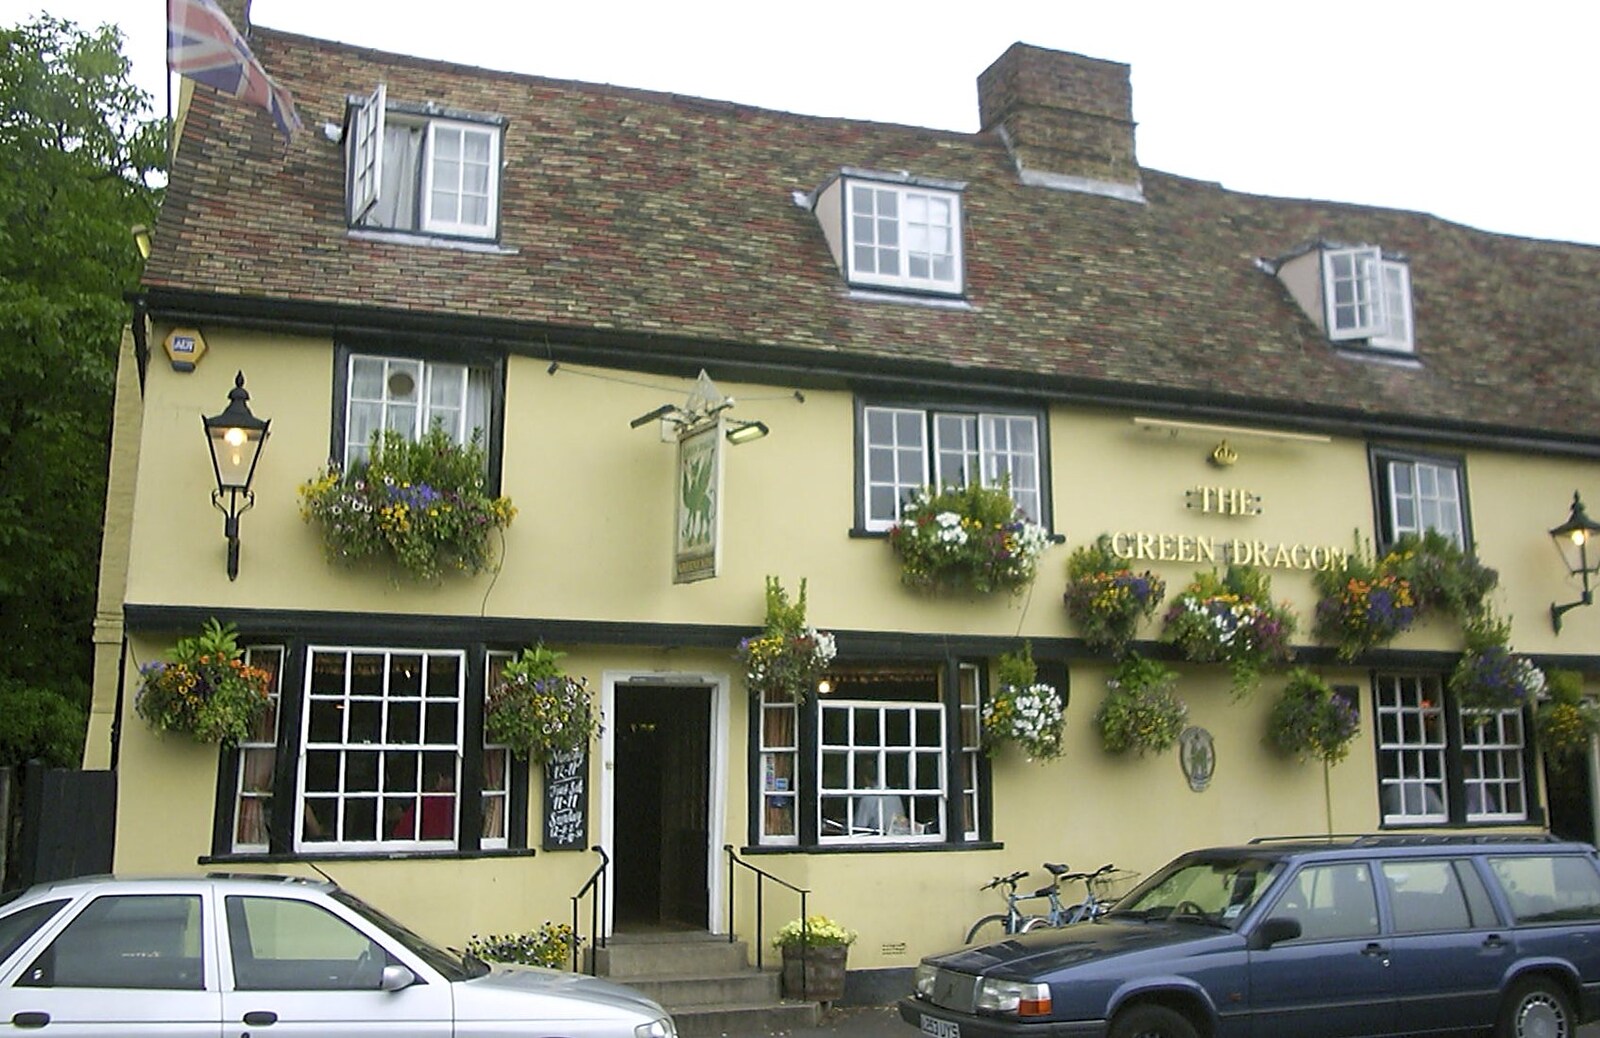 The Green Dragon pub from Andrey Leaves Trigenix, More Skelton Festival and a Transit of Venus, Cambridge and Diss - 4th June 2004